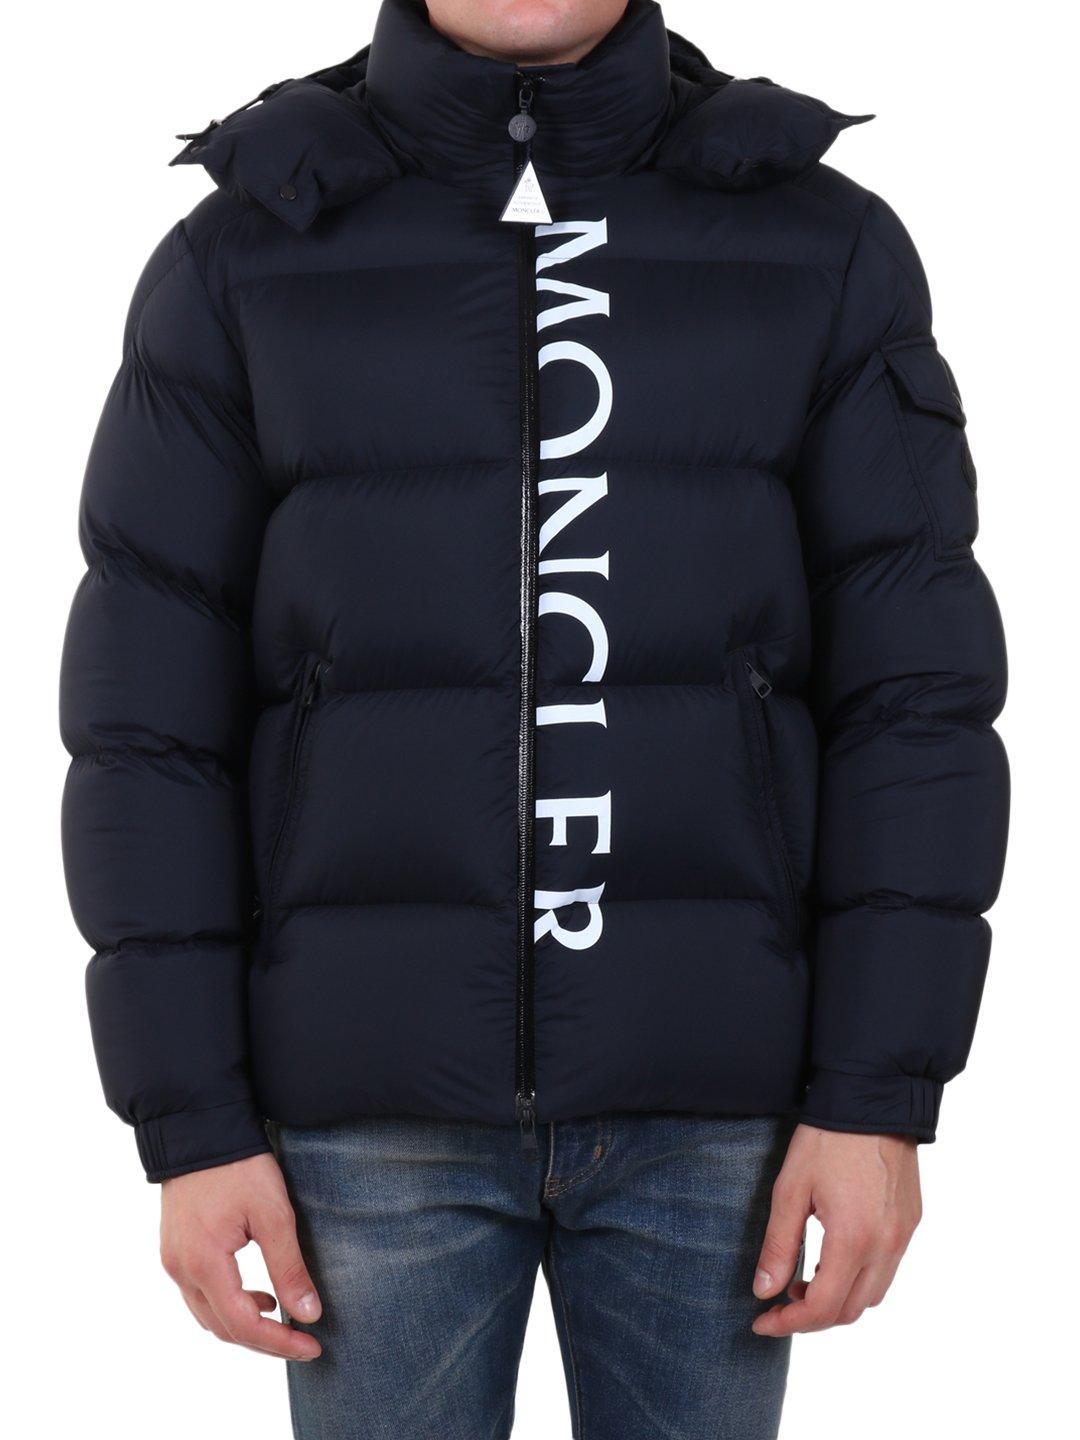 Moncler Synthetic Maures Down Jacket in Blue for Men - Lyst